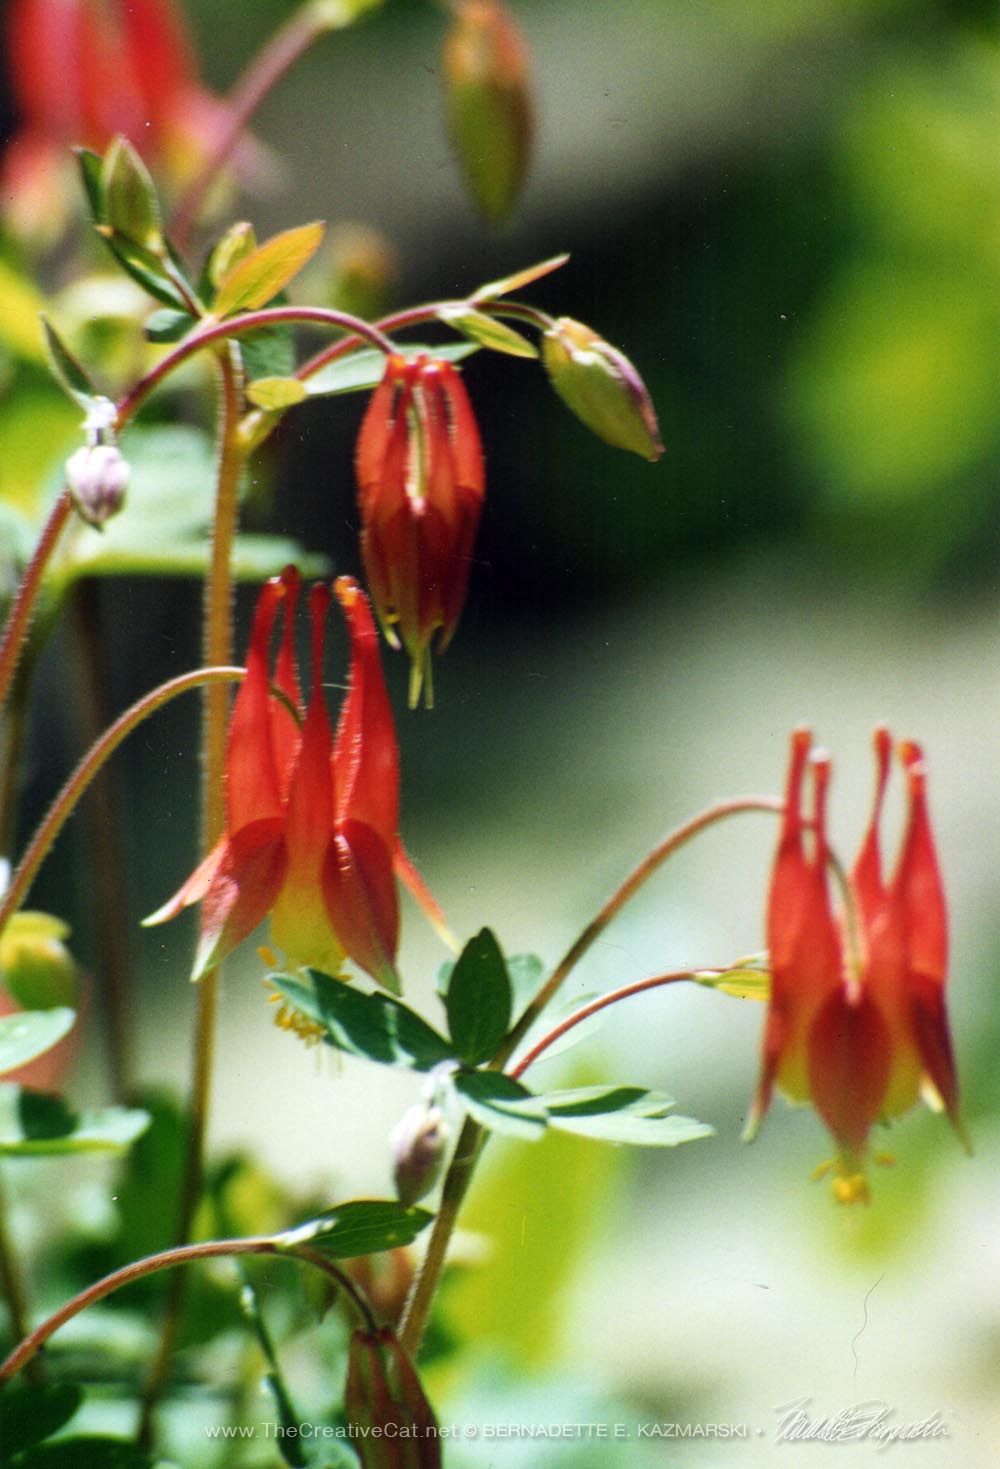 Native wild columbines, trying to capture their buoyant blooming habit.